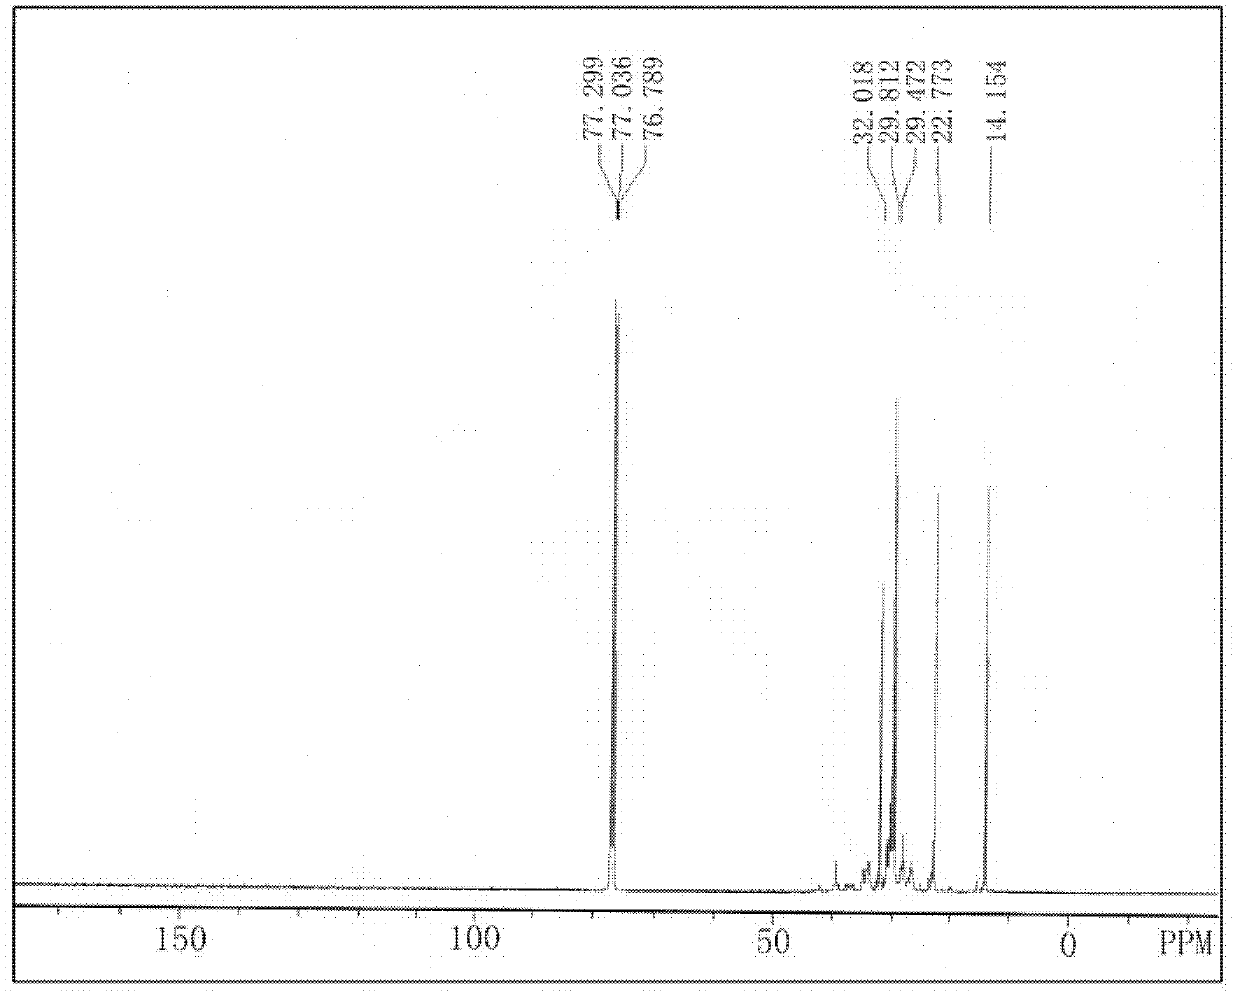 Method for preparing synthetic hydrocarbon containing aromatic hydrocarbon from internal olefin